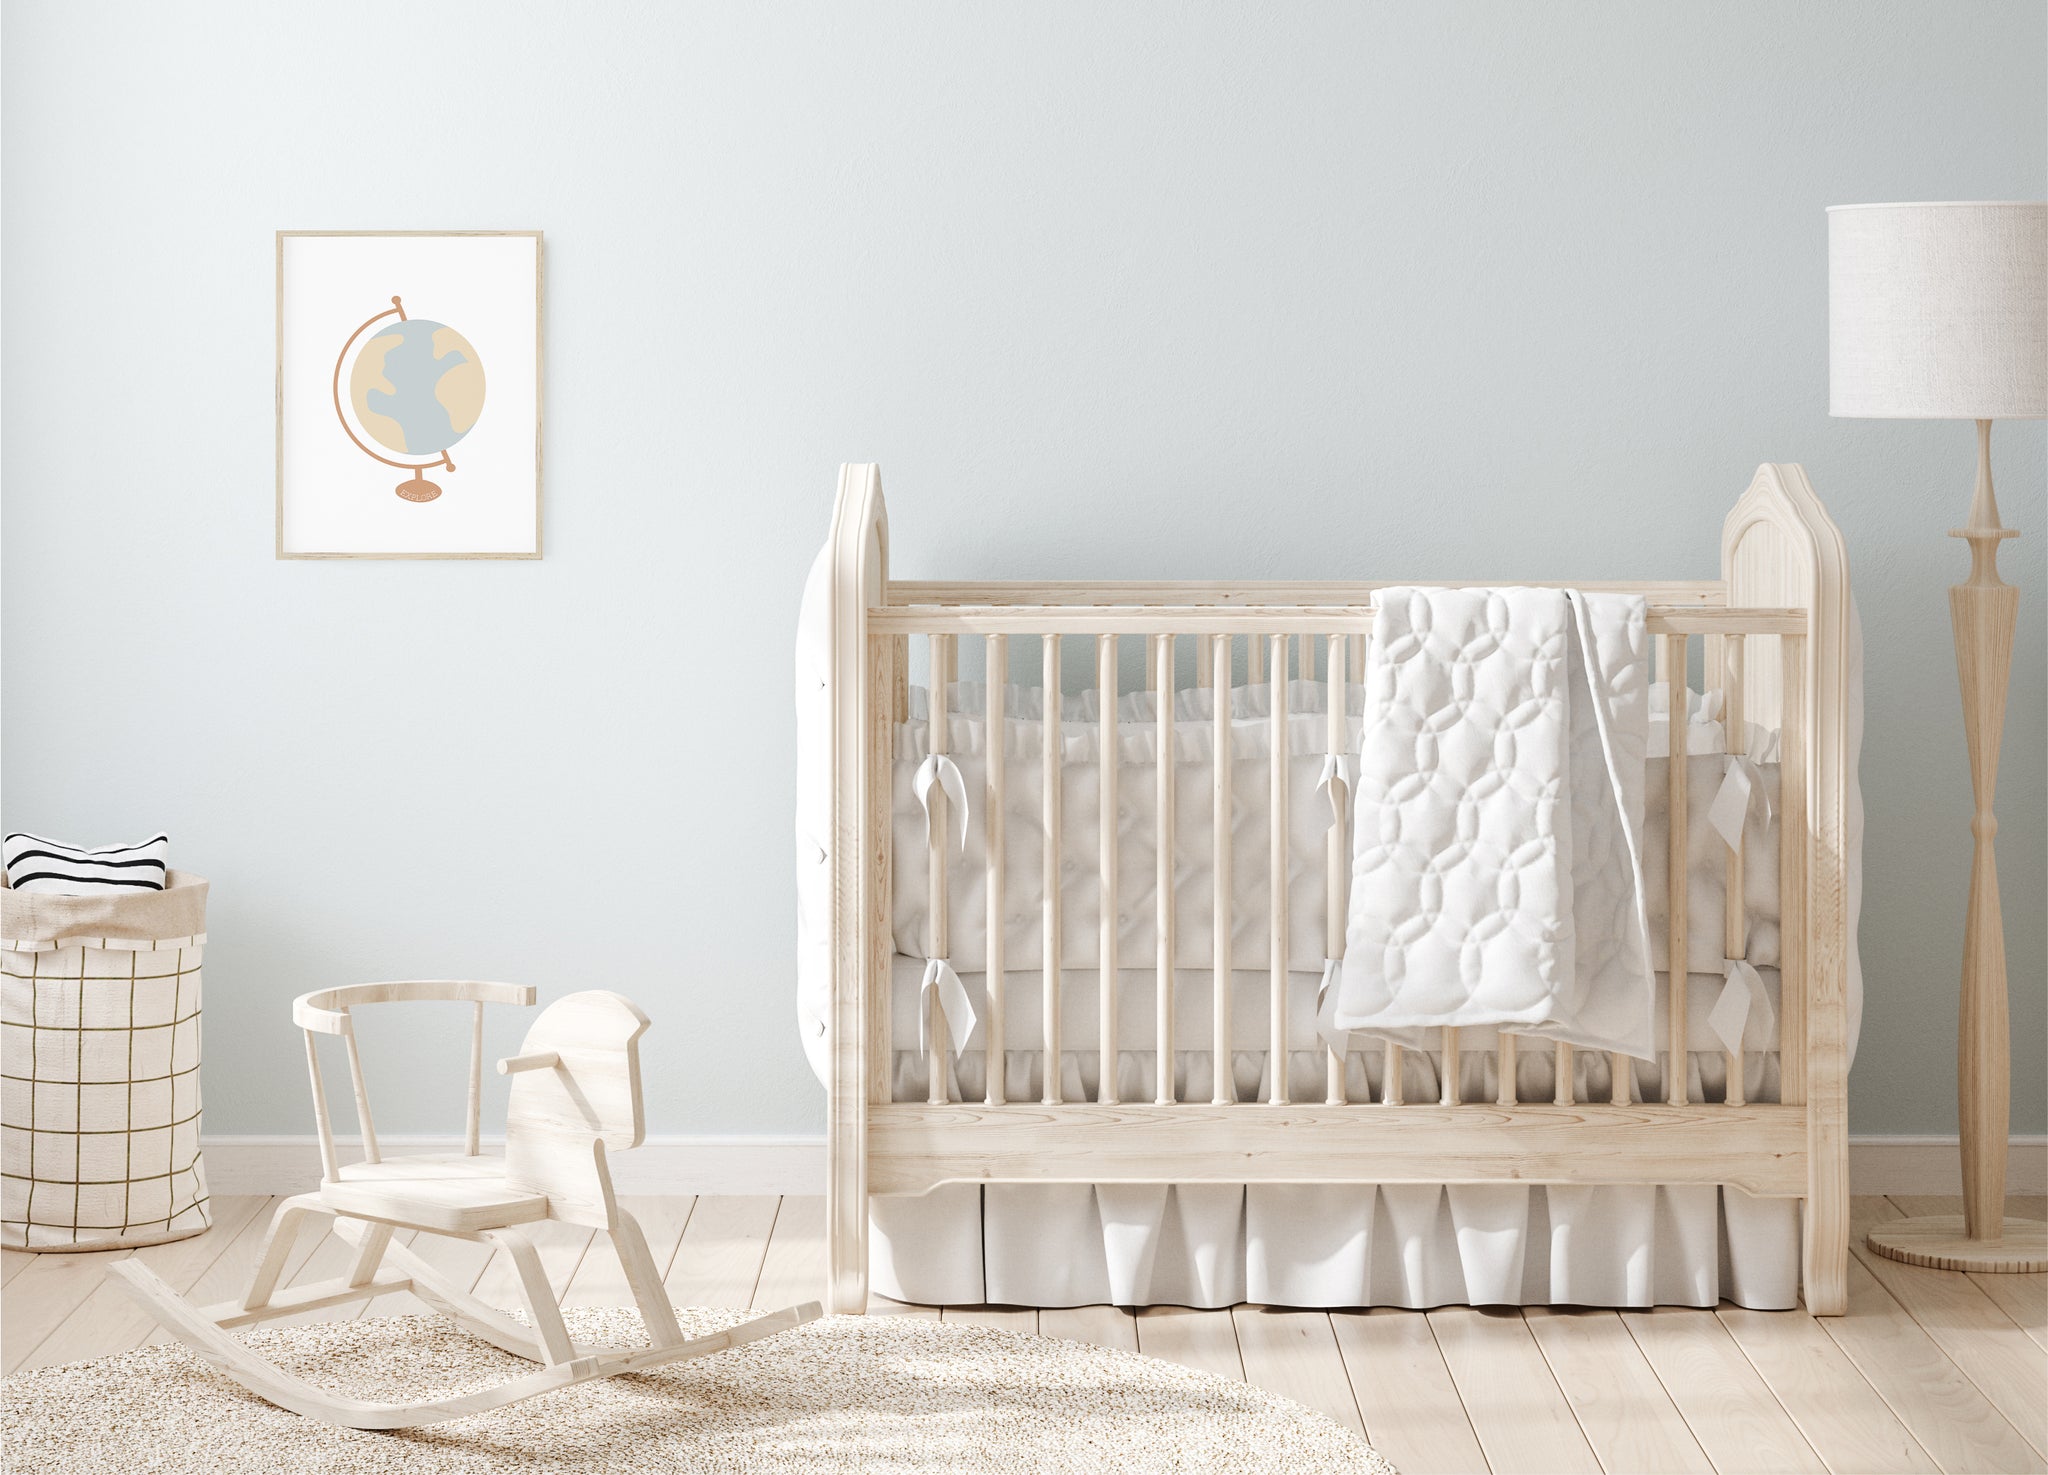 Baby nursery with blue wall, light wood furniture, and globe artwork